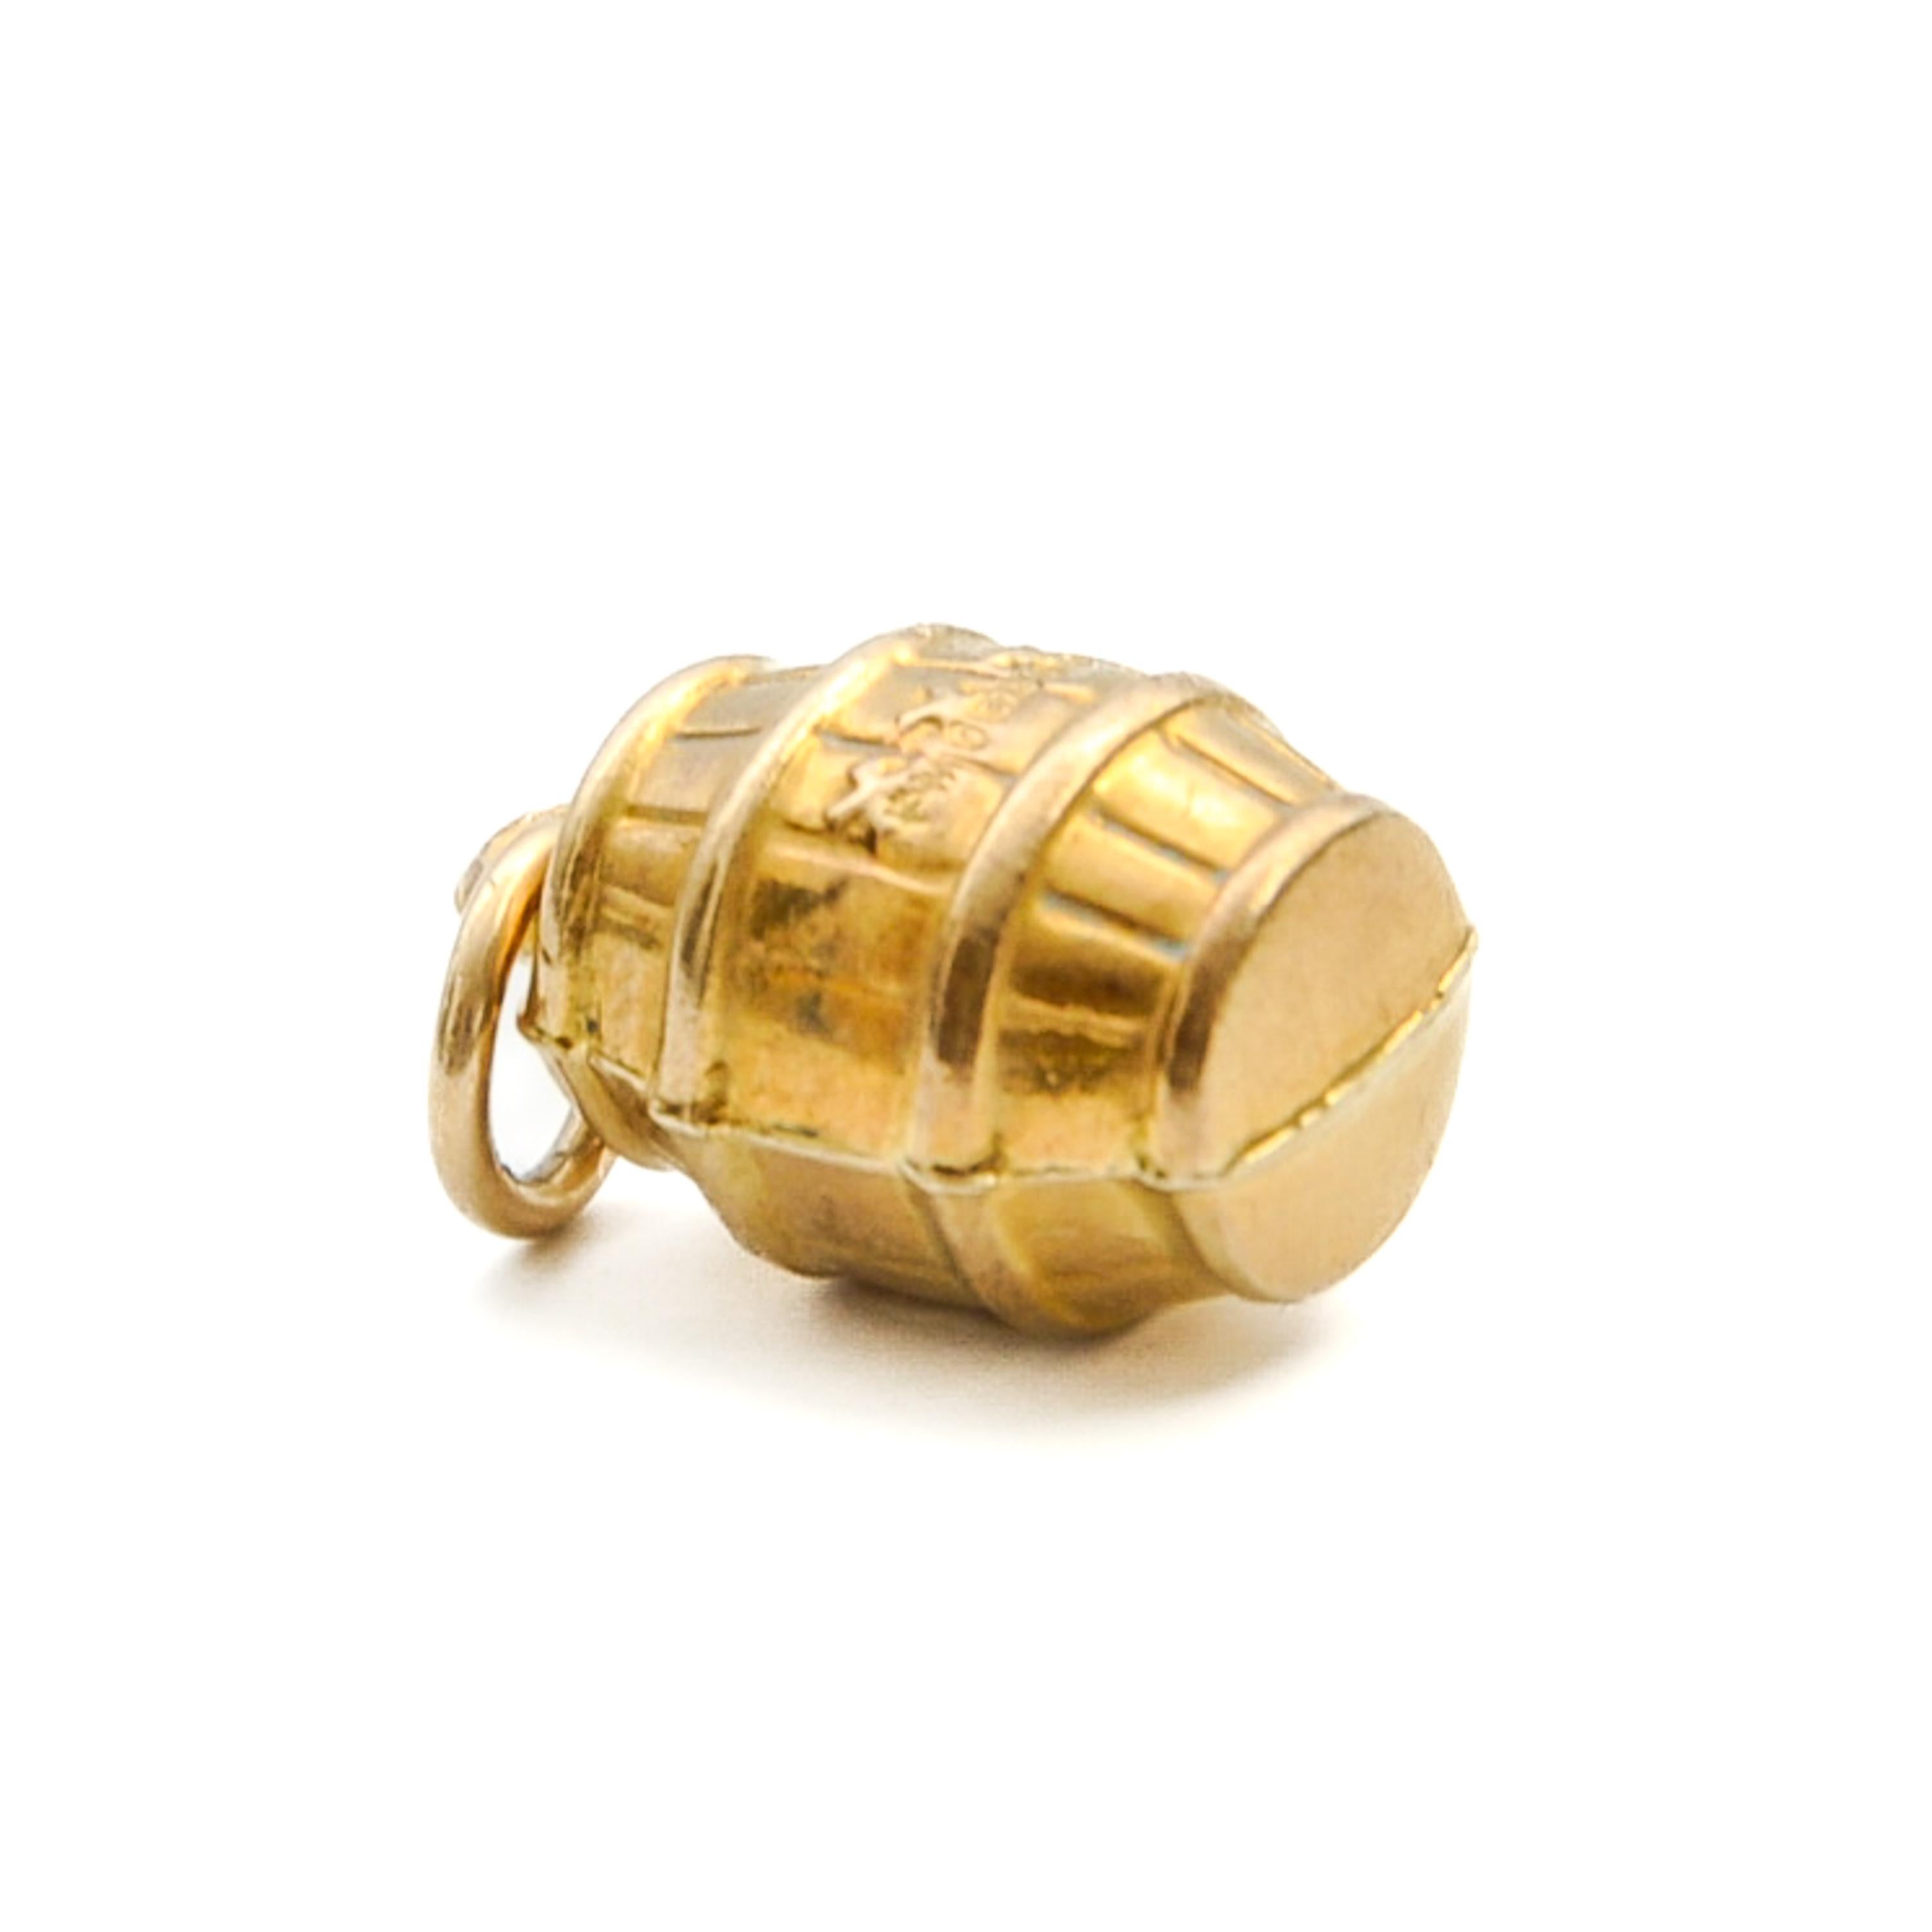 Vintage 9K Gold Barrel Charm Pendant In Good Condition For Sale In Rotterdam, NL